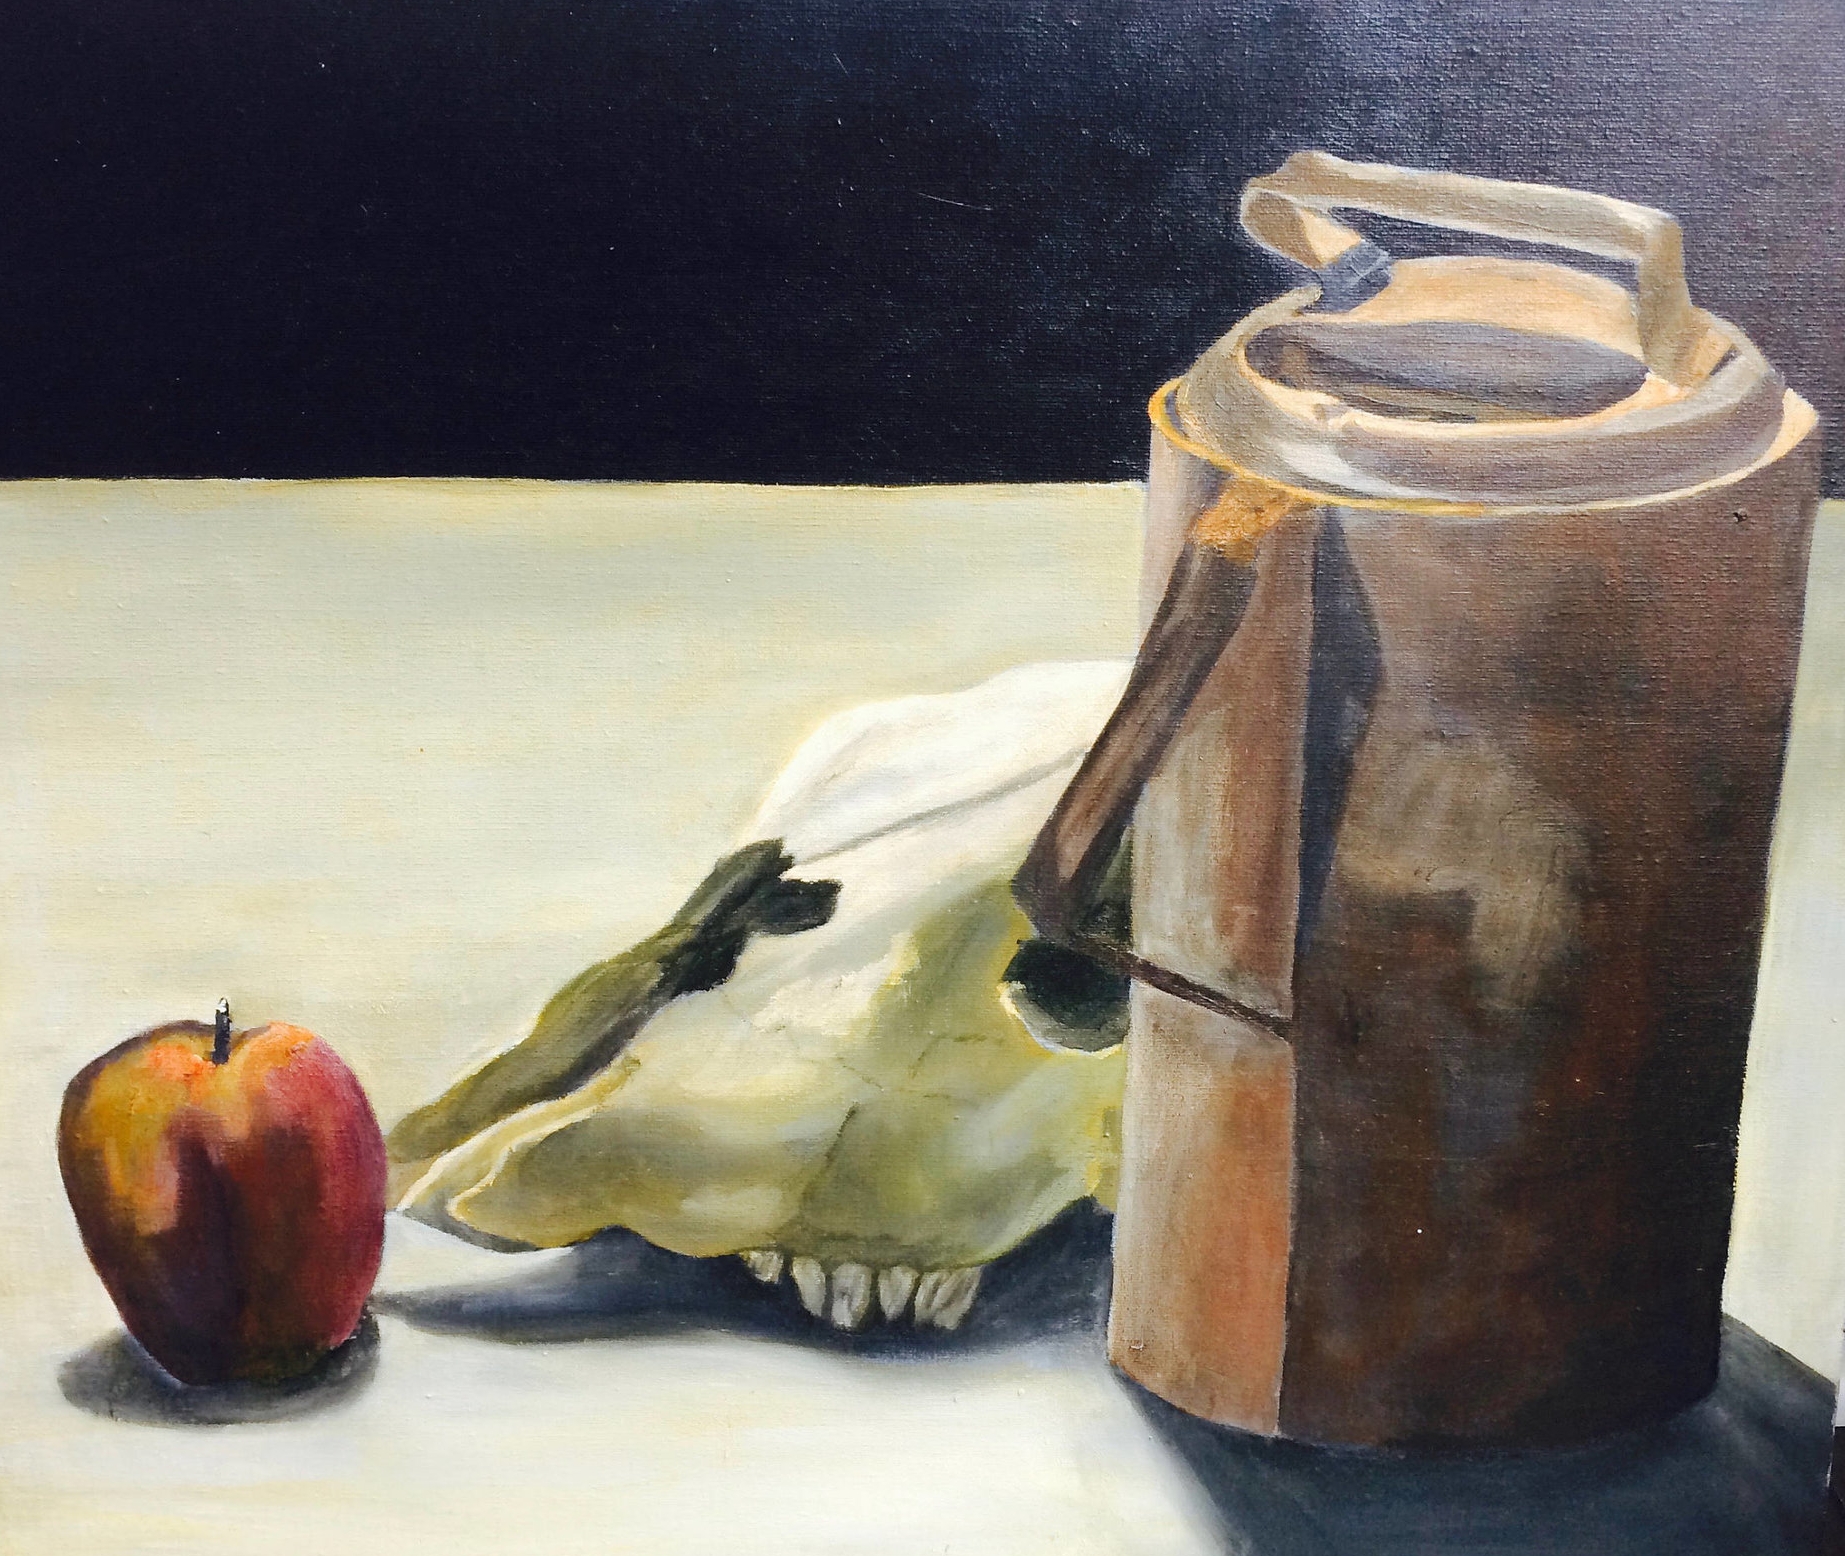 Vintage Original Still Life Painting With Apple & Skull/Vintage Original Painting/Still Life Painting/Acrylic Painting/Skull